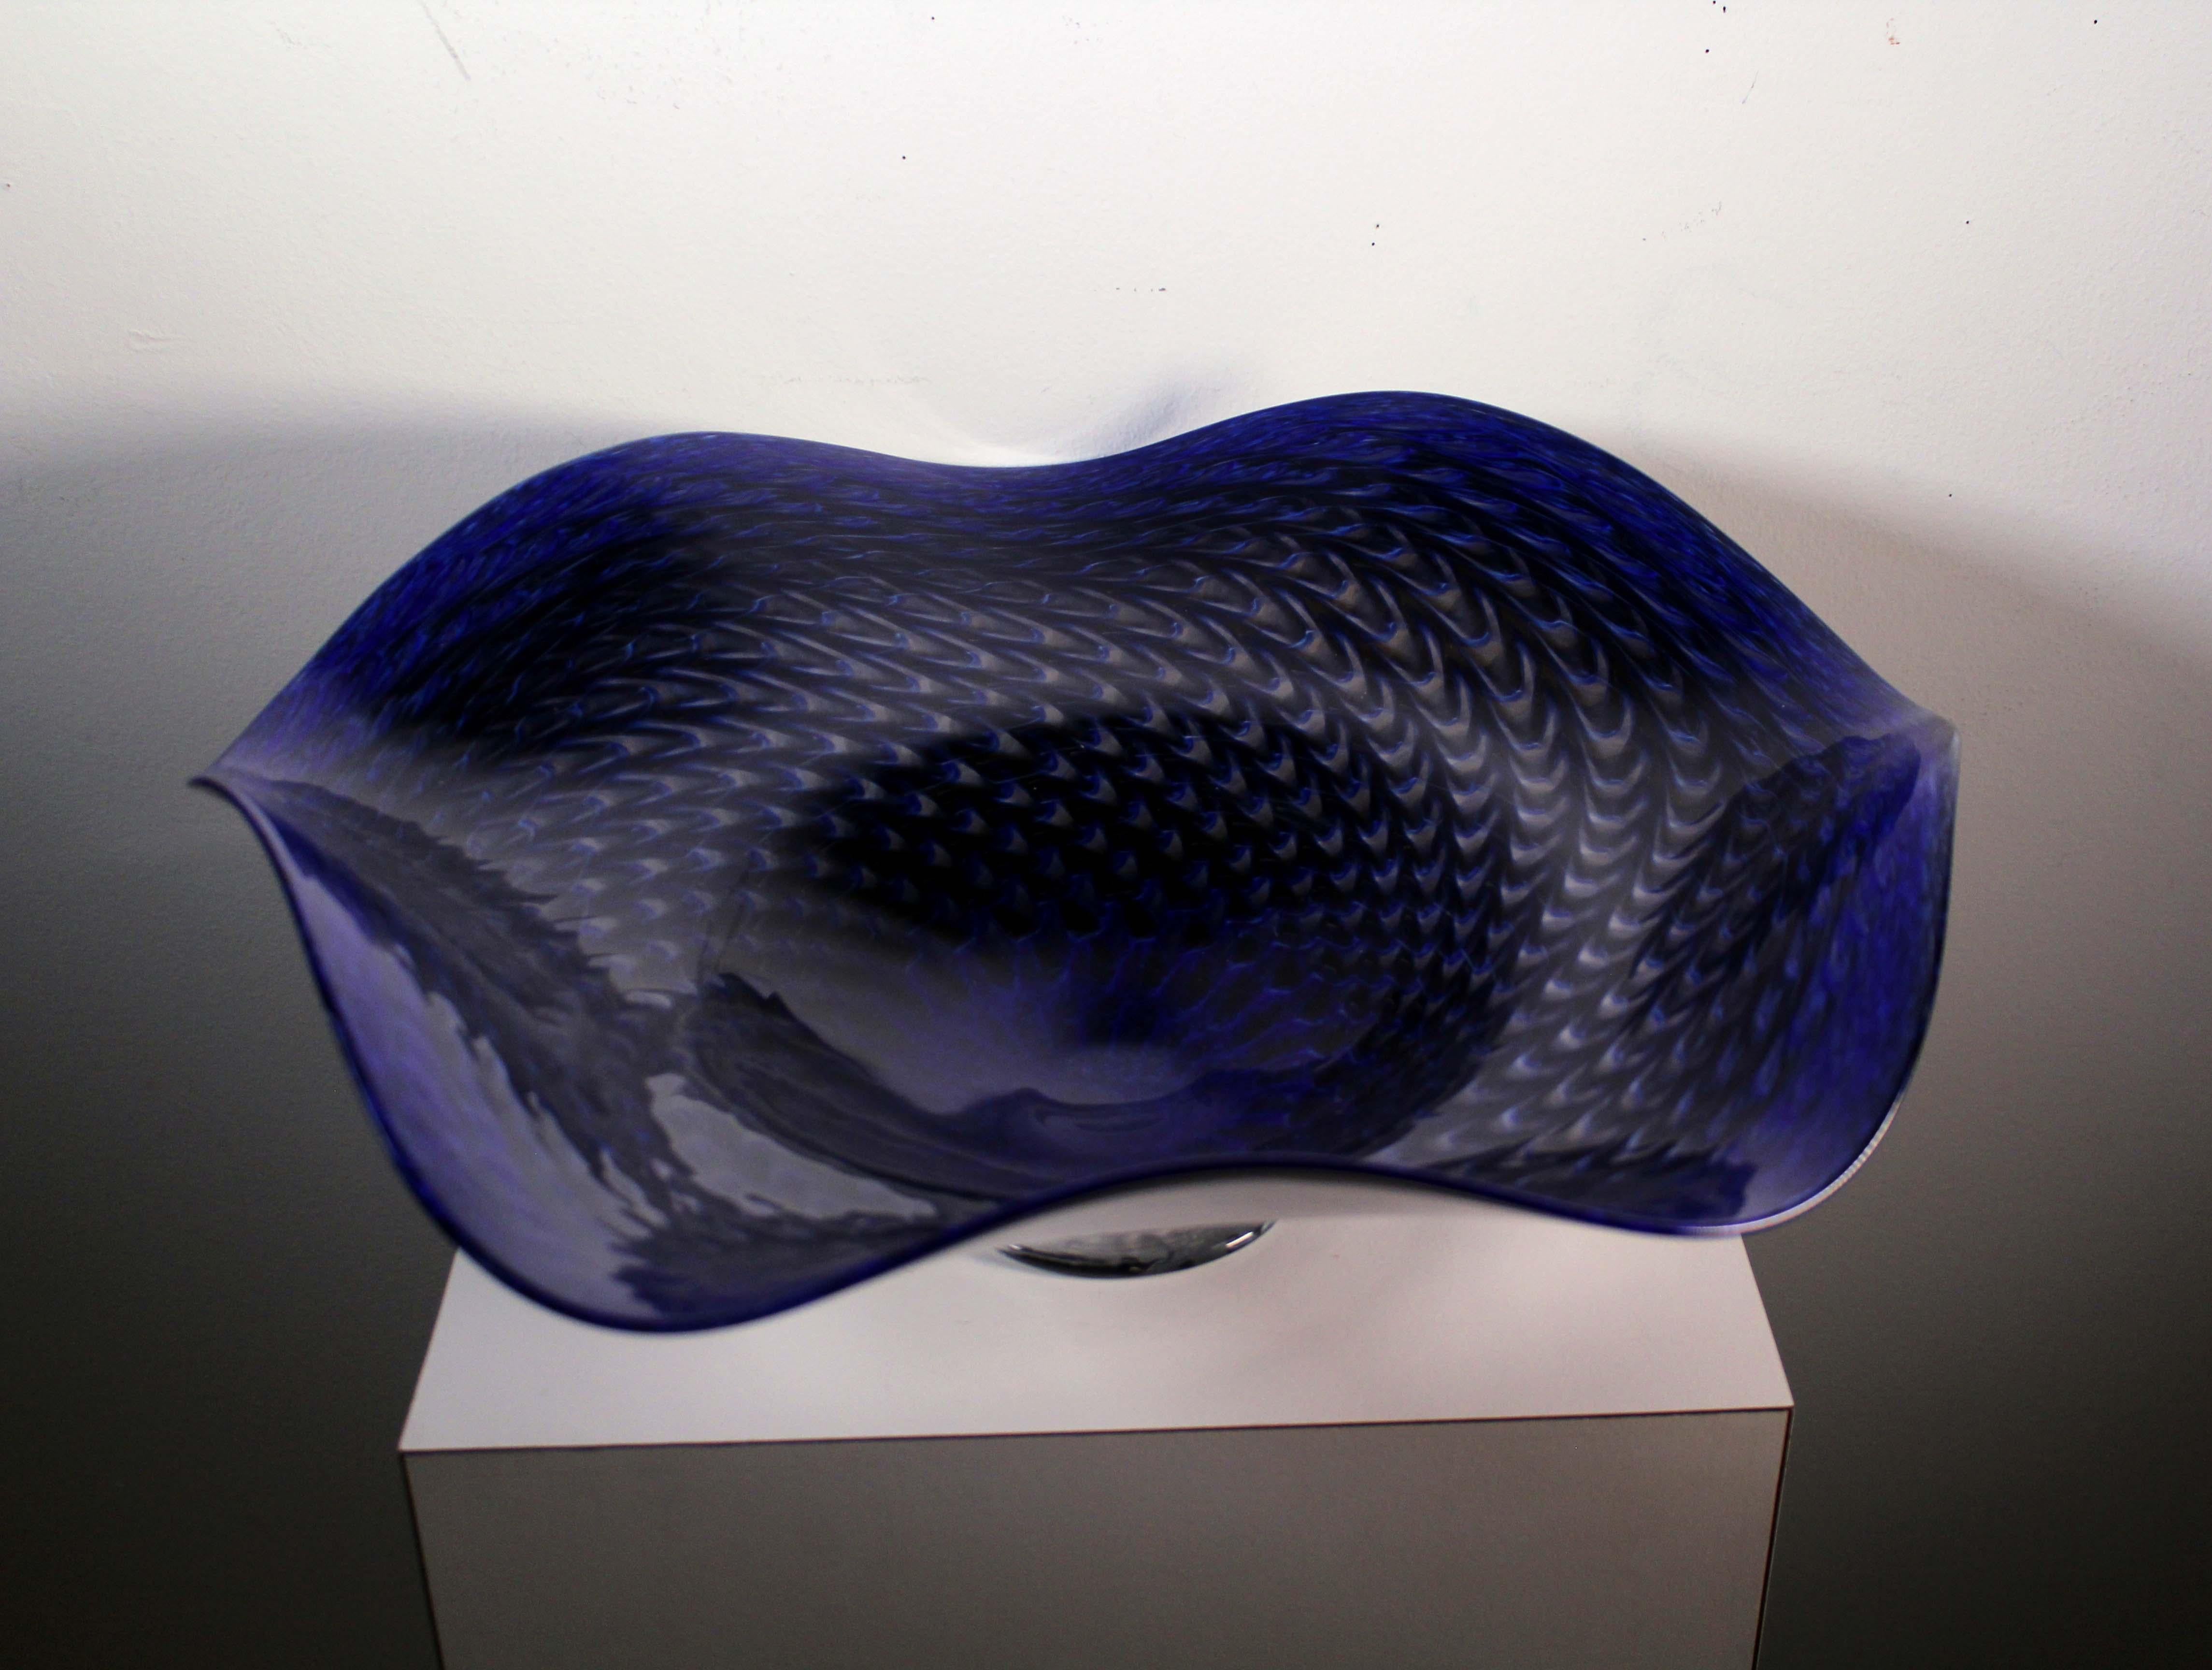 This stunning Ron Mynatt cobalt fluted signed art glass bowl is a beautiful piece of art. Made from hand-blown glass, this bowl has a gorgeous cobalt blue color and a unique fluted design. It features a signature from Ron Mynatt, an artist known for